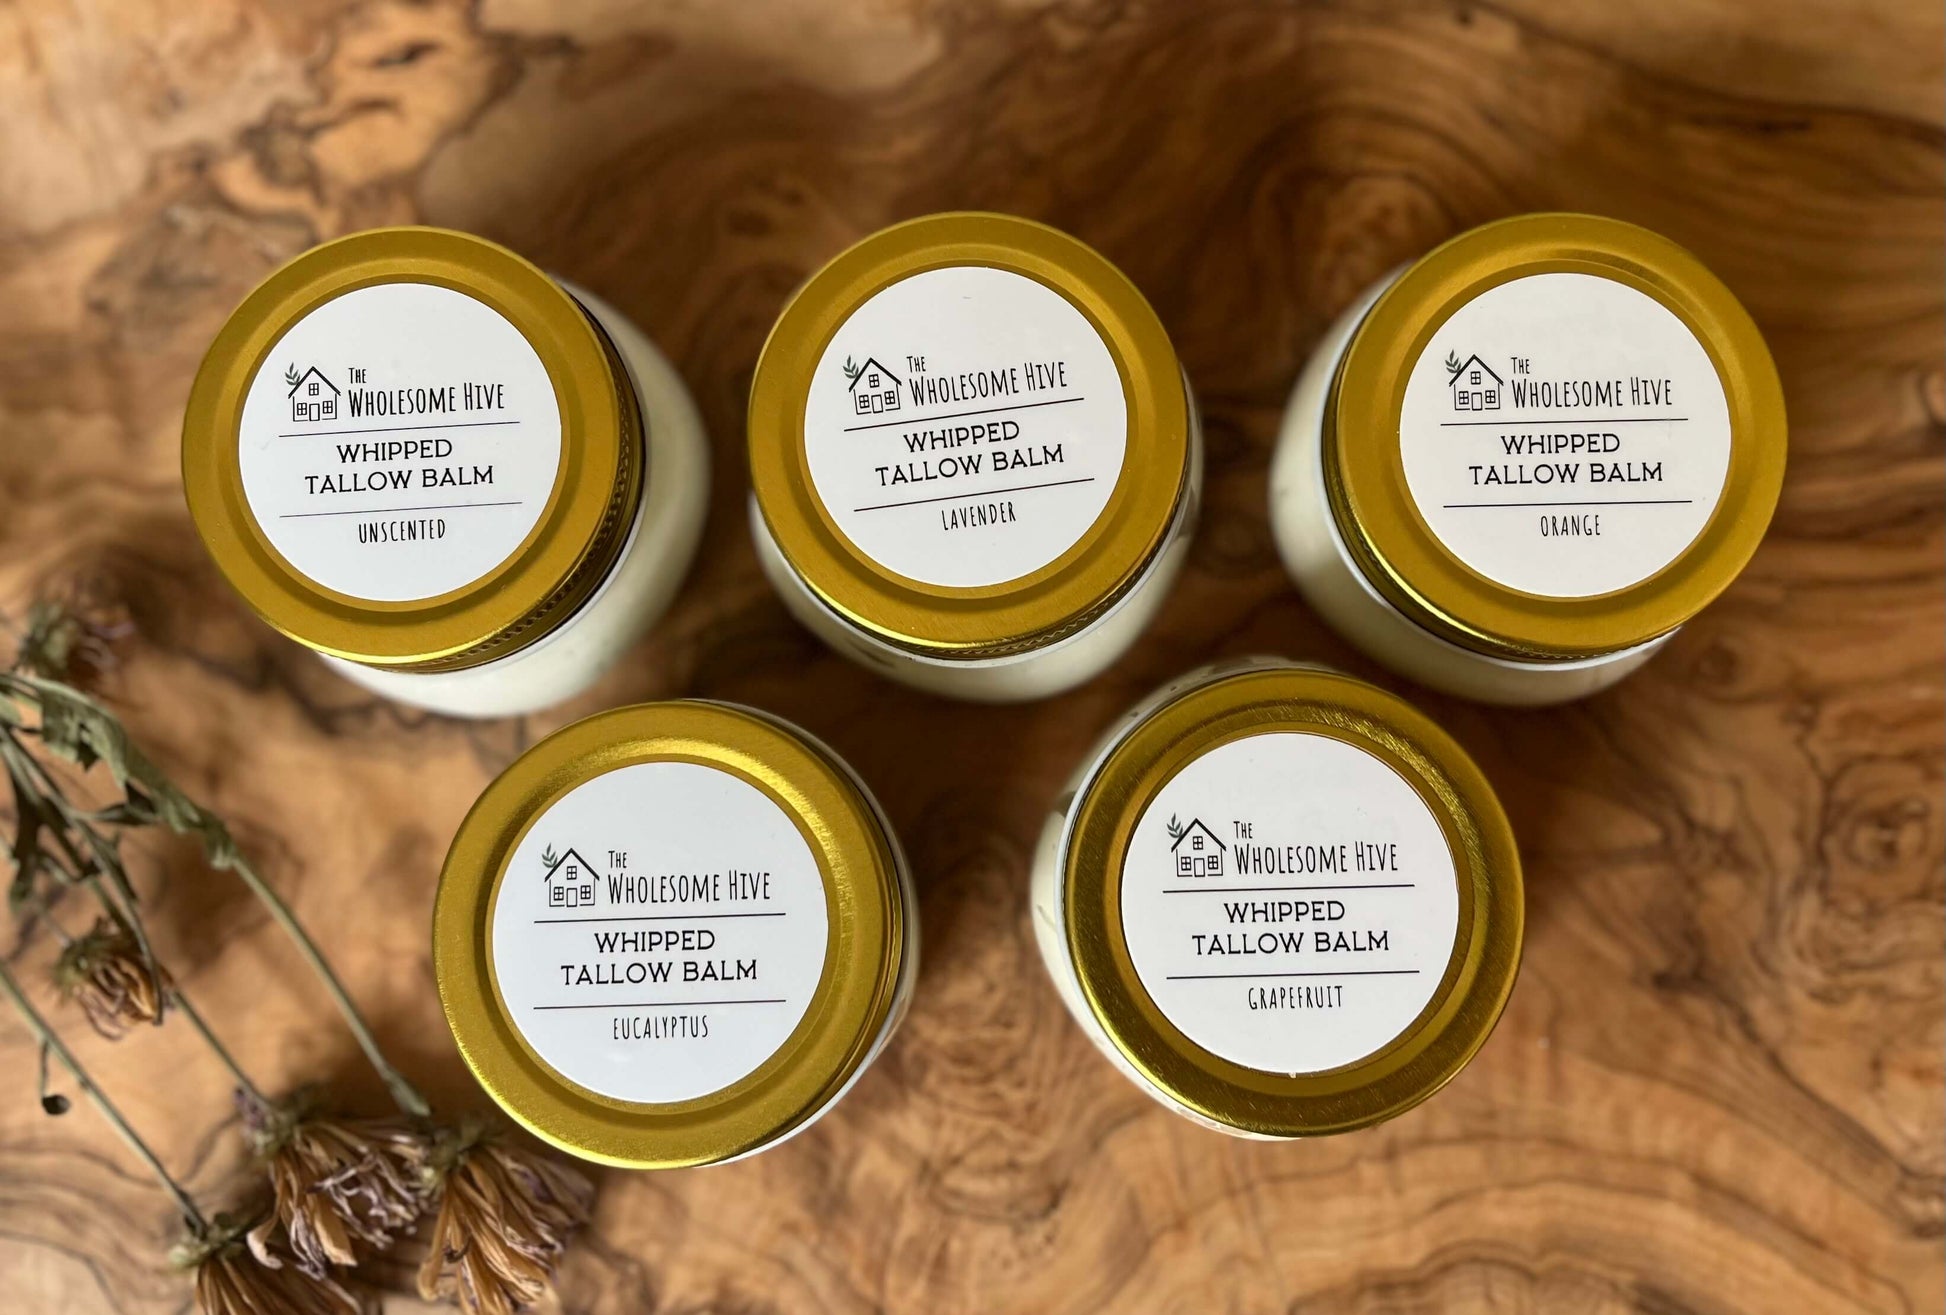 5oz Whipped Tallow Balm – The Wholesome Hive